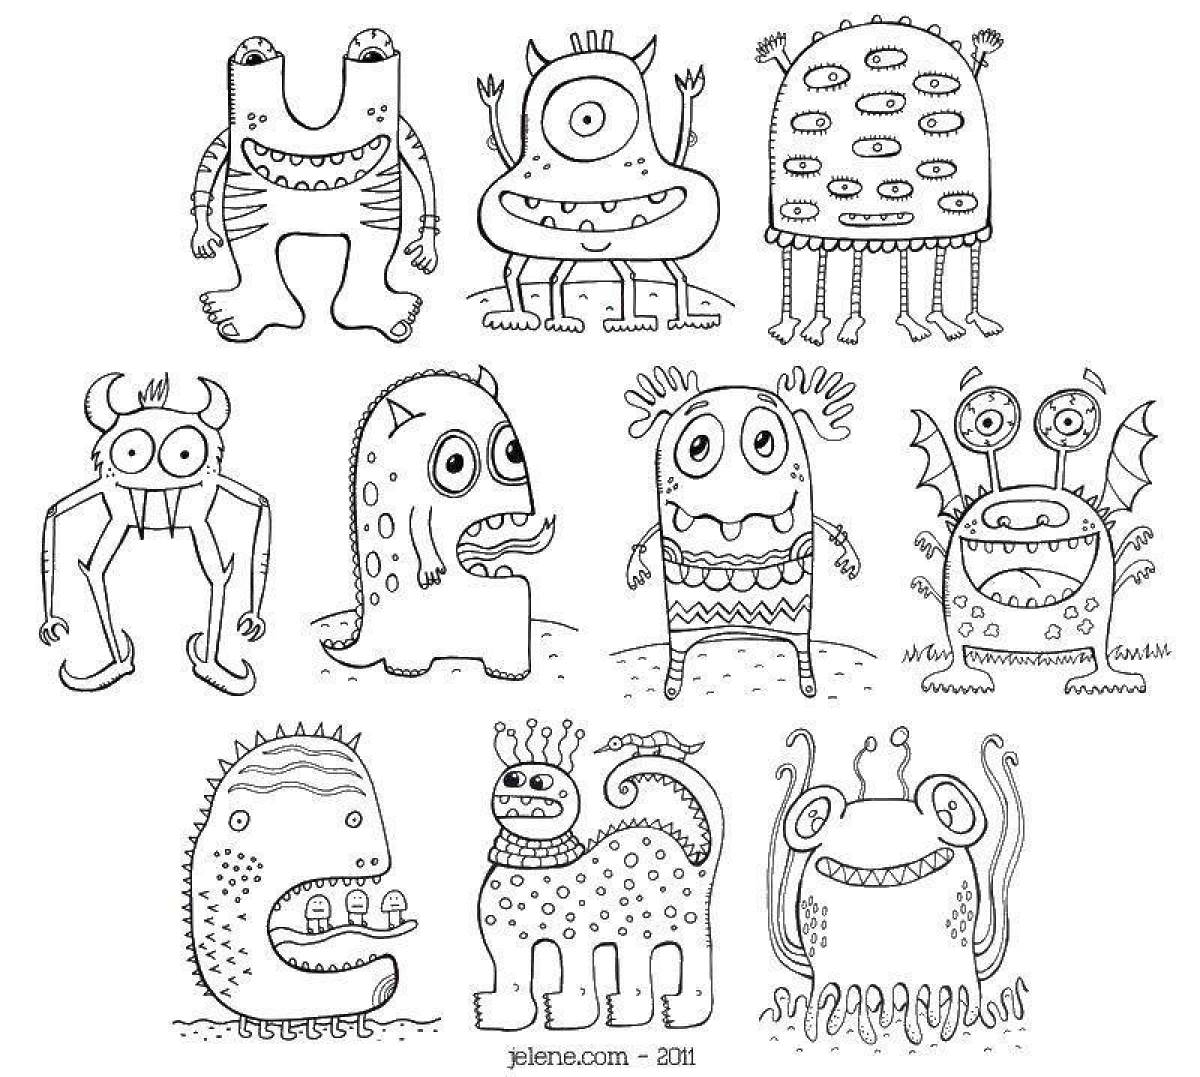 Monsters #6